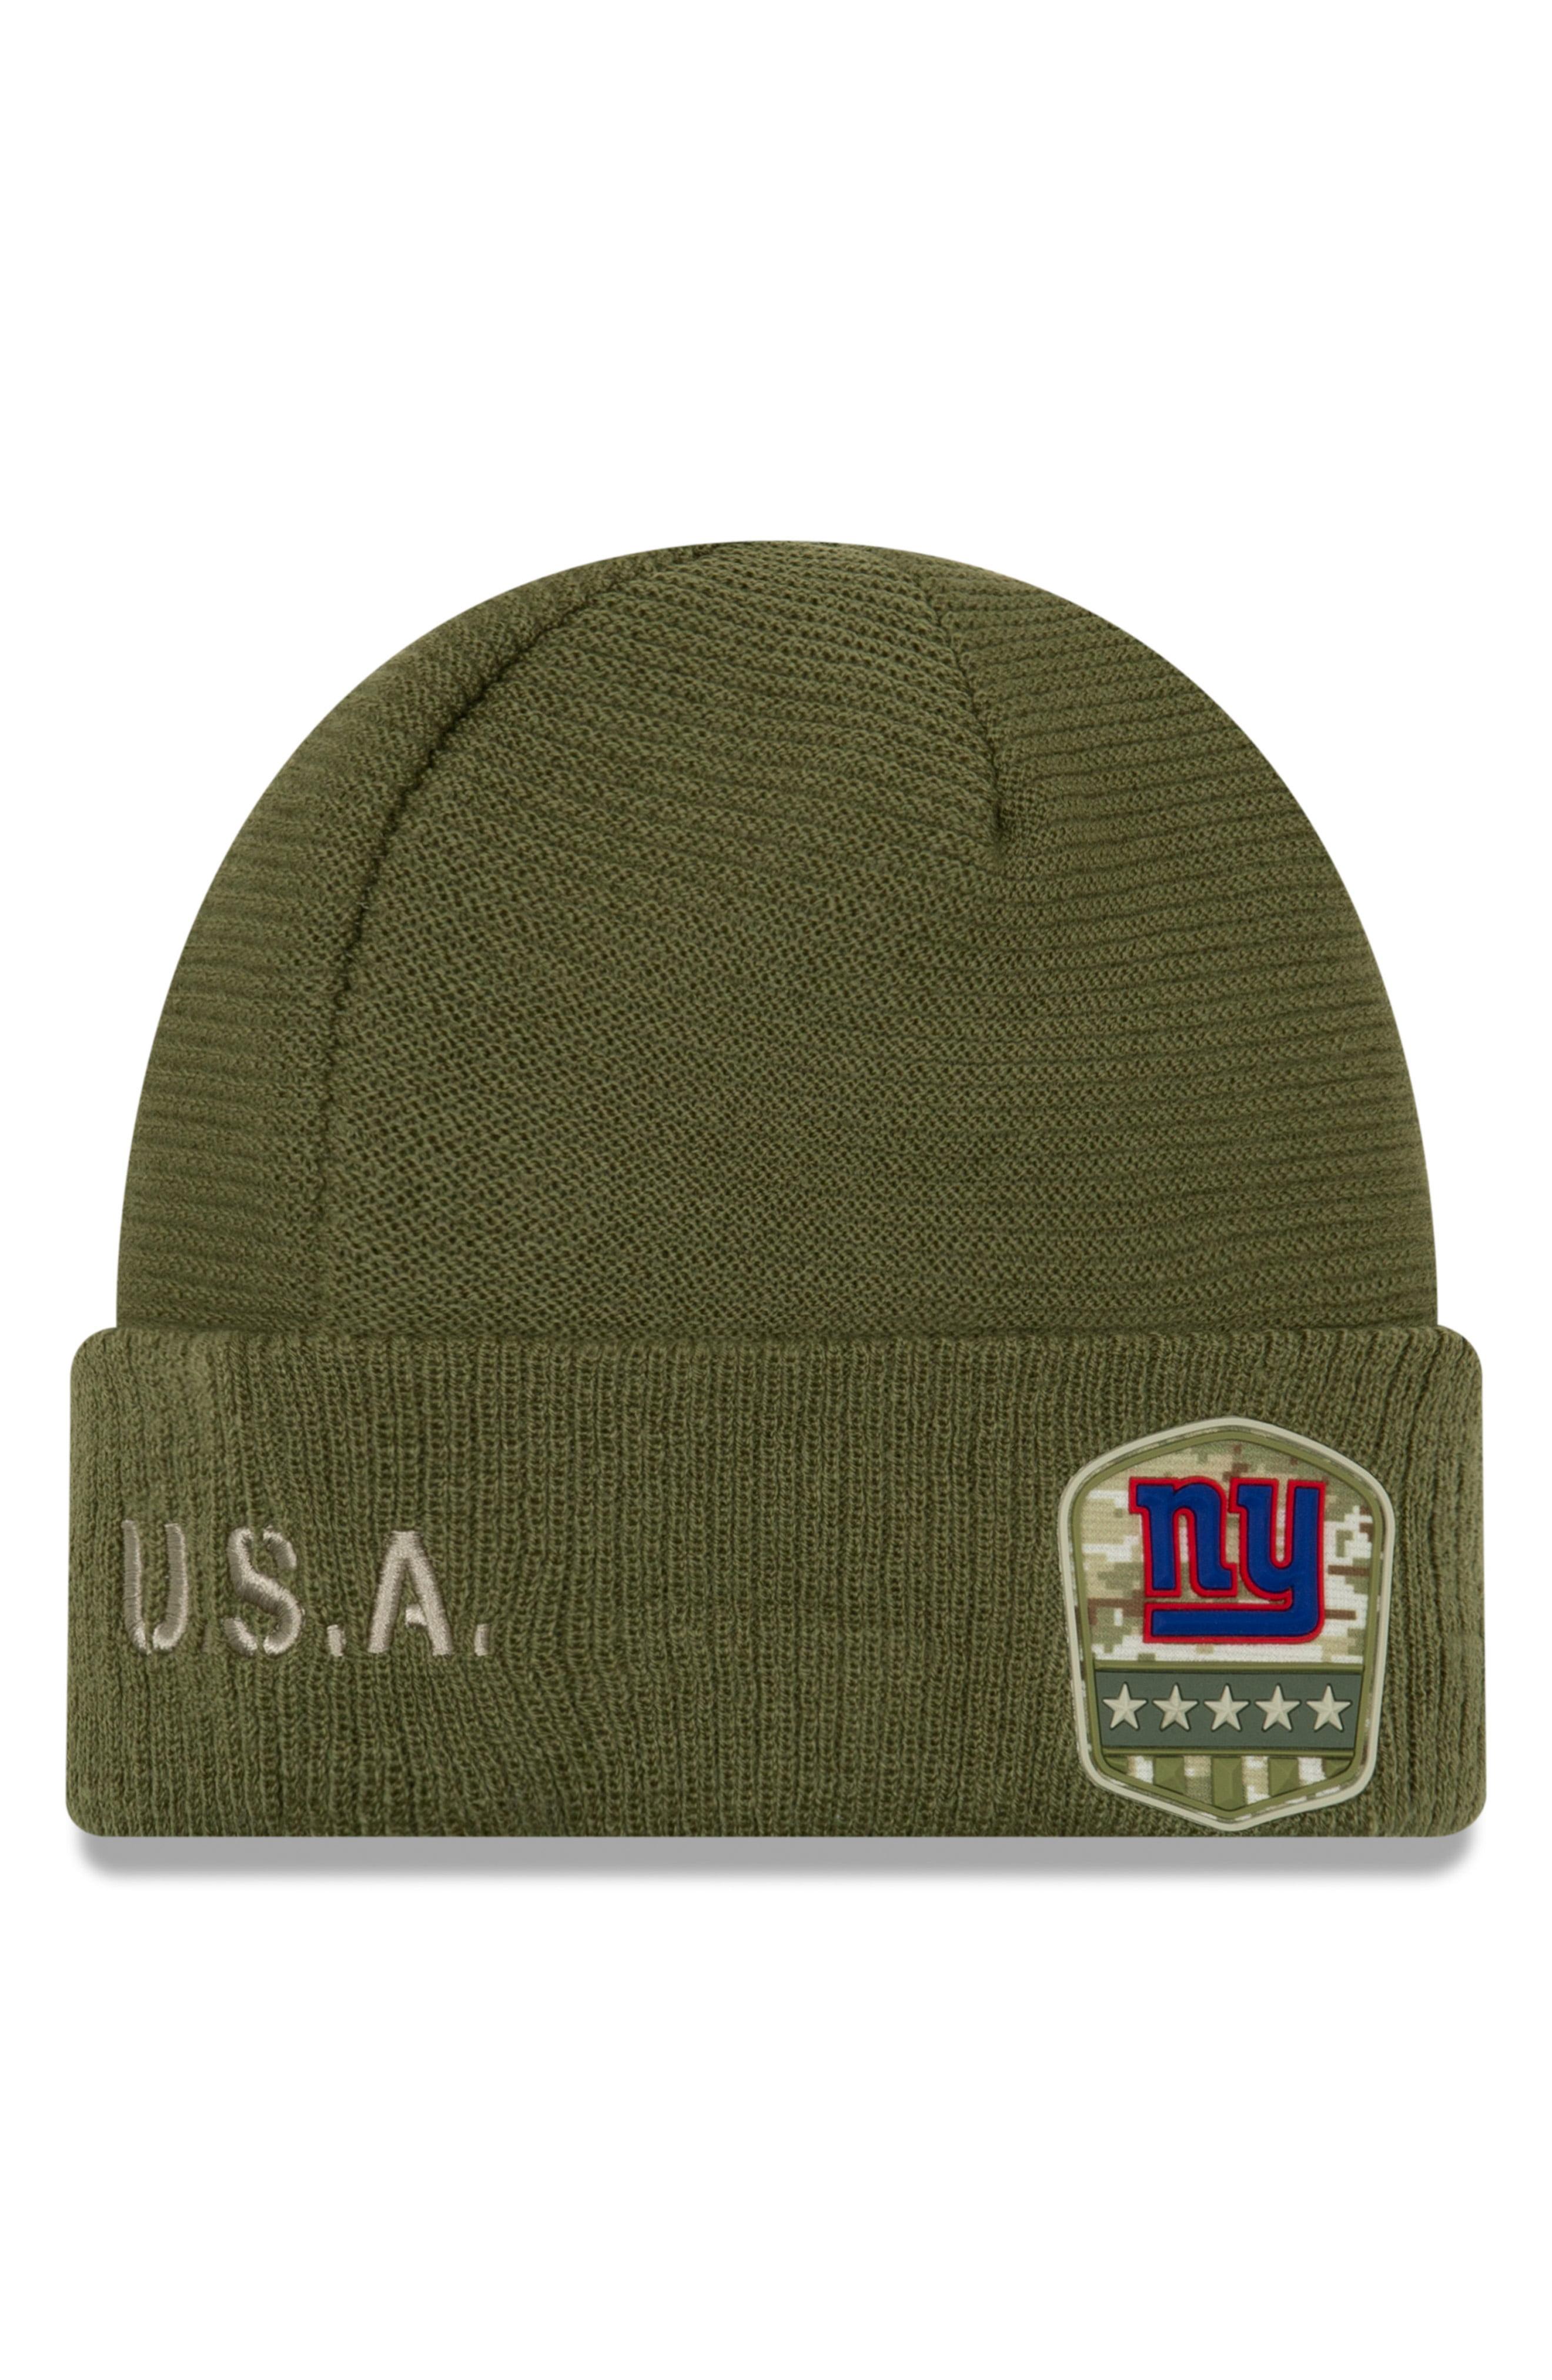 KTZ Salute To Service Nfl Beanie in 